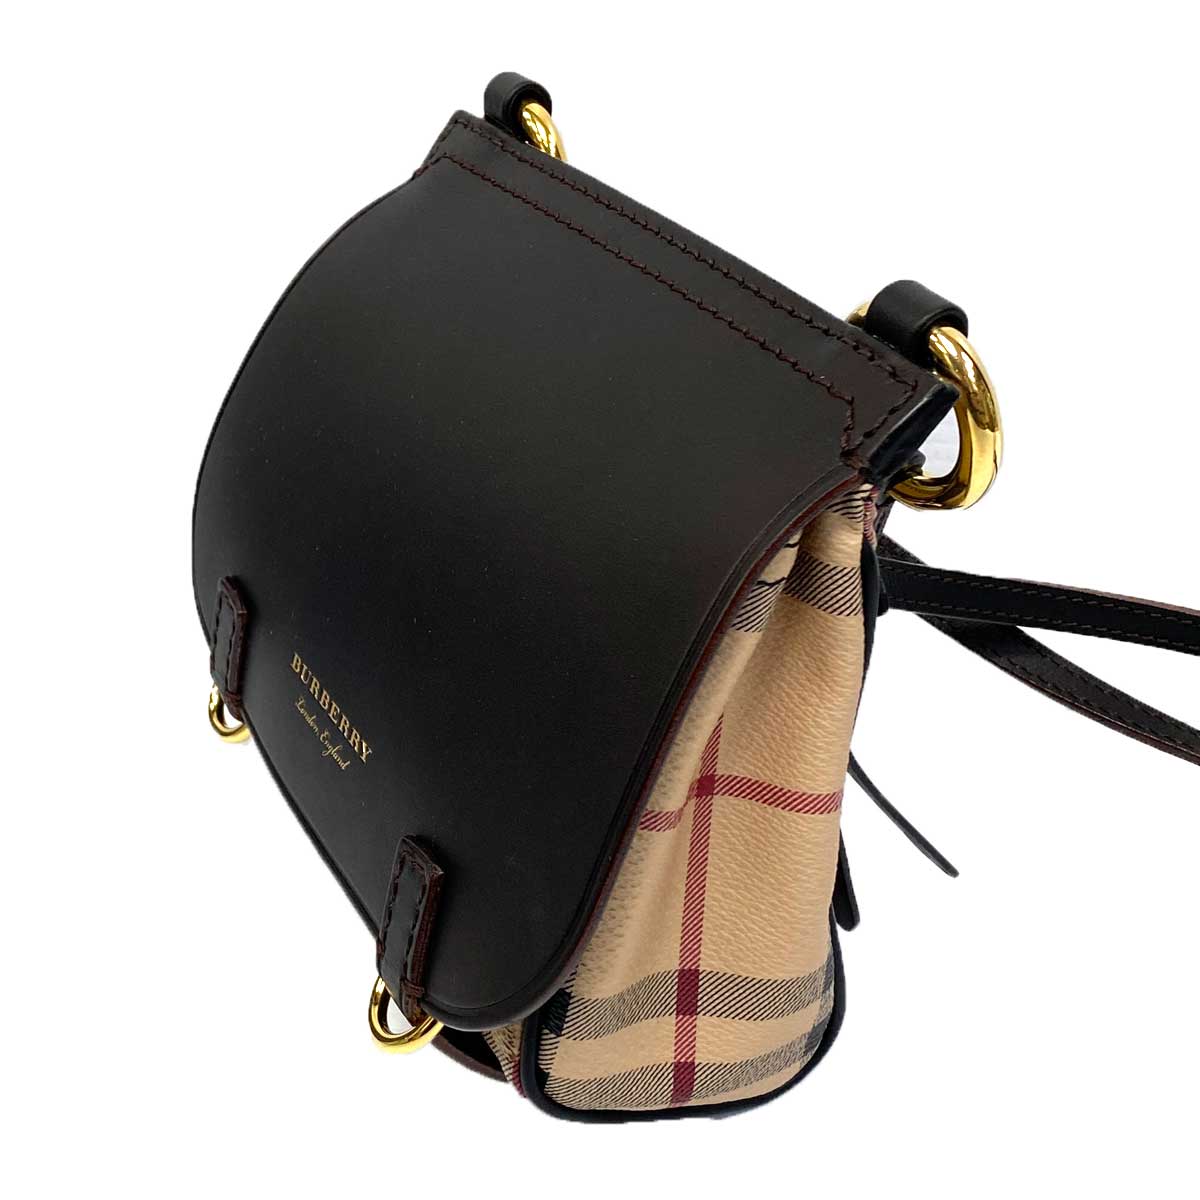 Burberry Bridle Saddle Bag Leather and Haymarket Check Coated